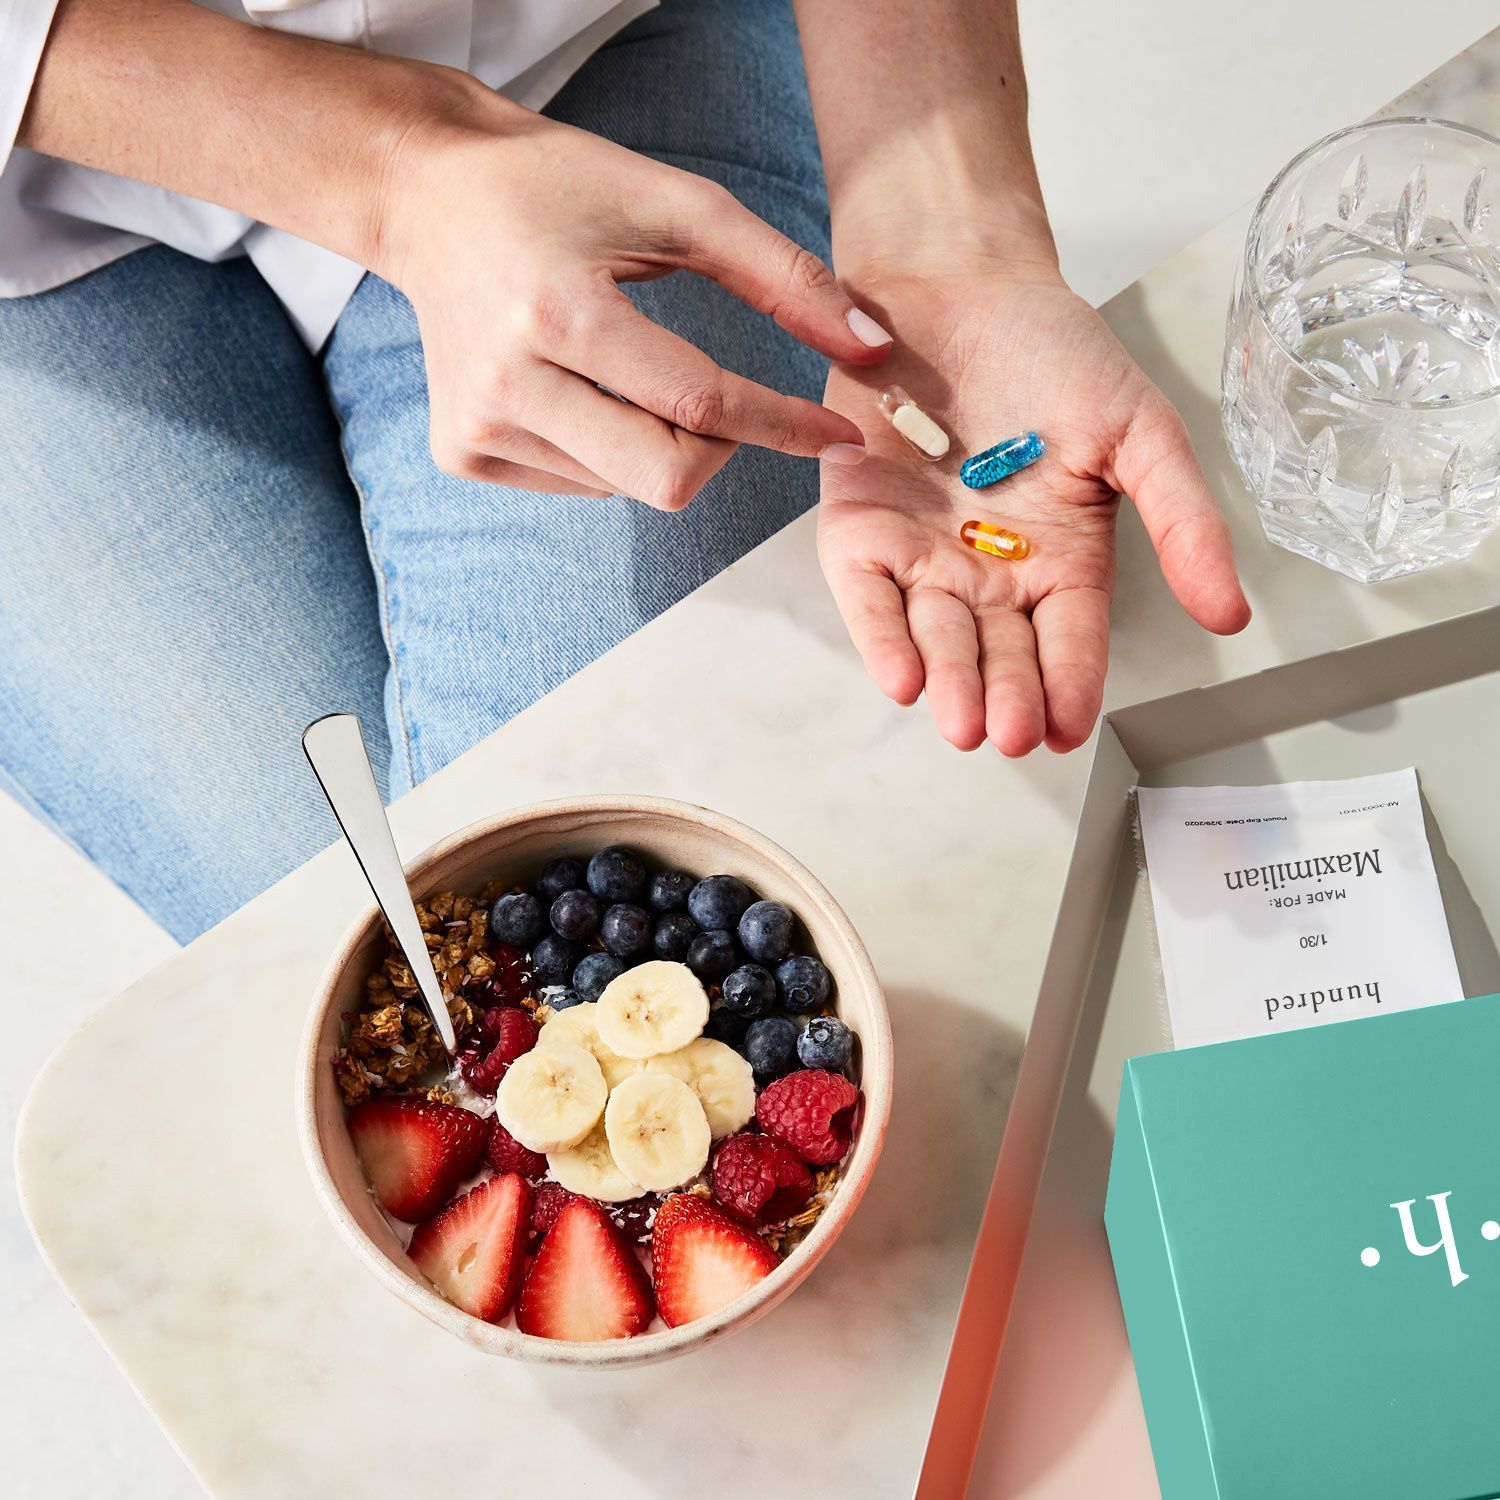 Woman holds pills and supplement vitamins in here hand over a marble table with a green box and fruit cereal bowl on countertop